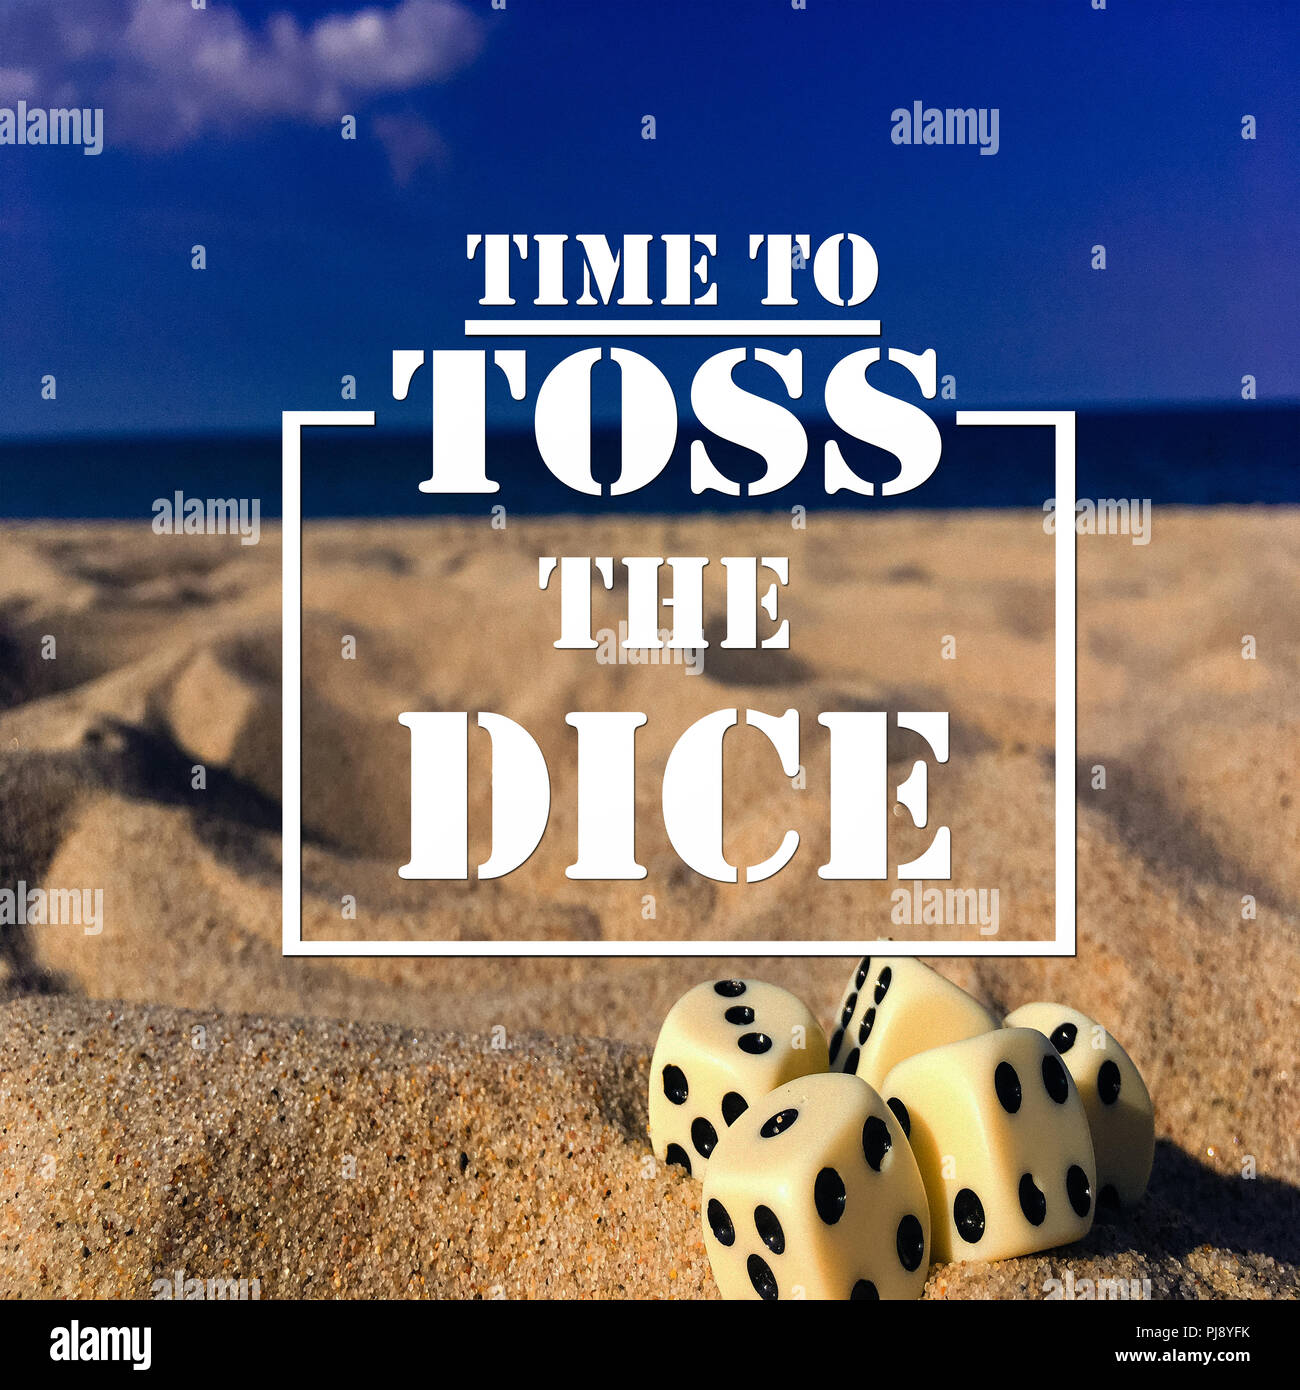 Inspirational Quotes: Time to toss the dice, positive ...